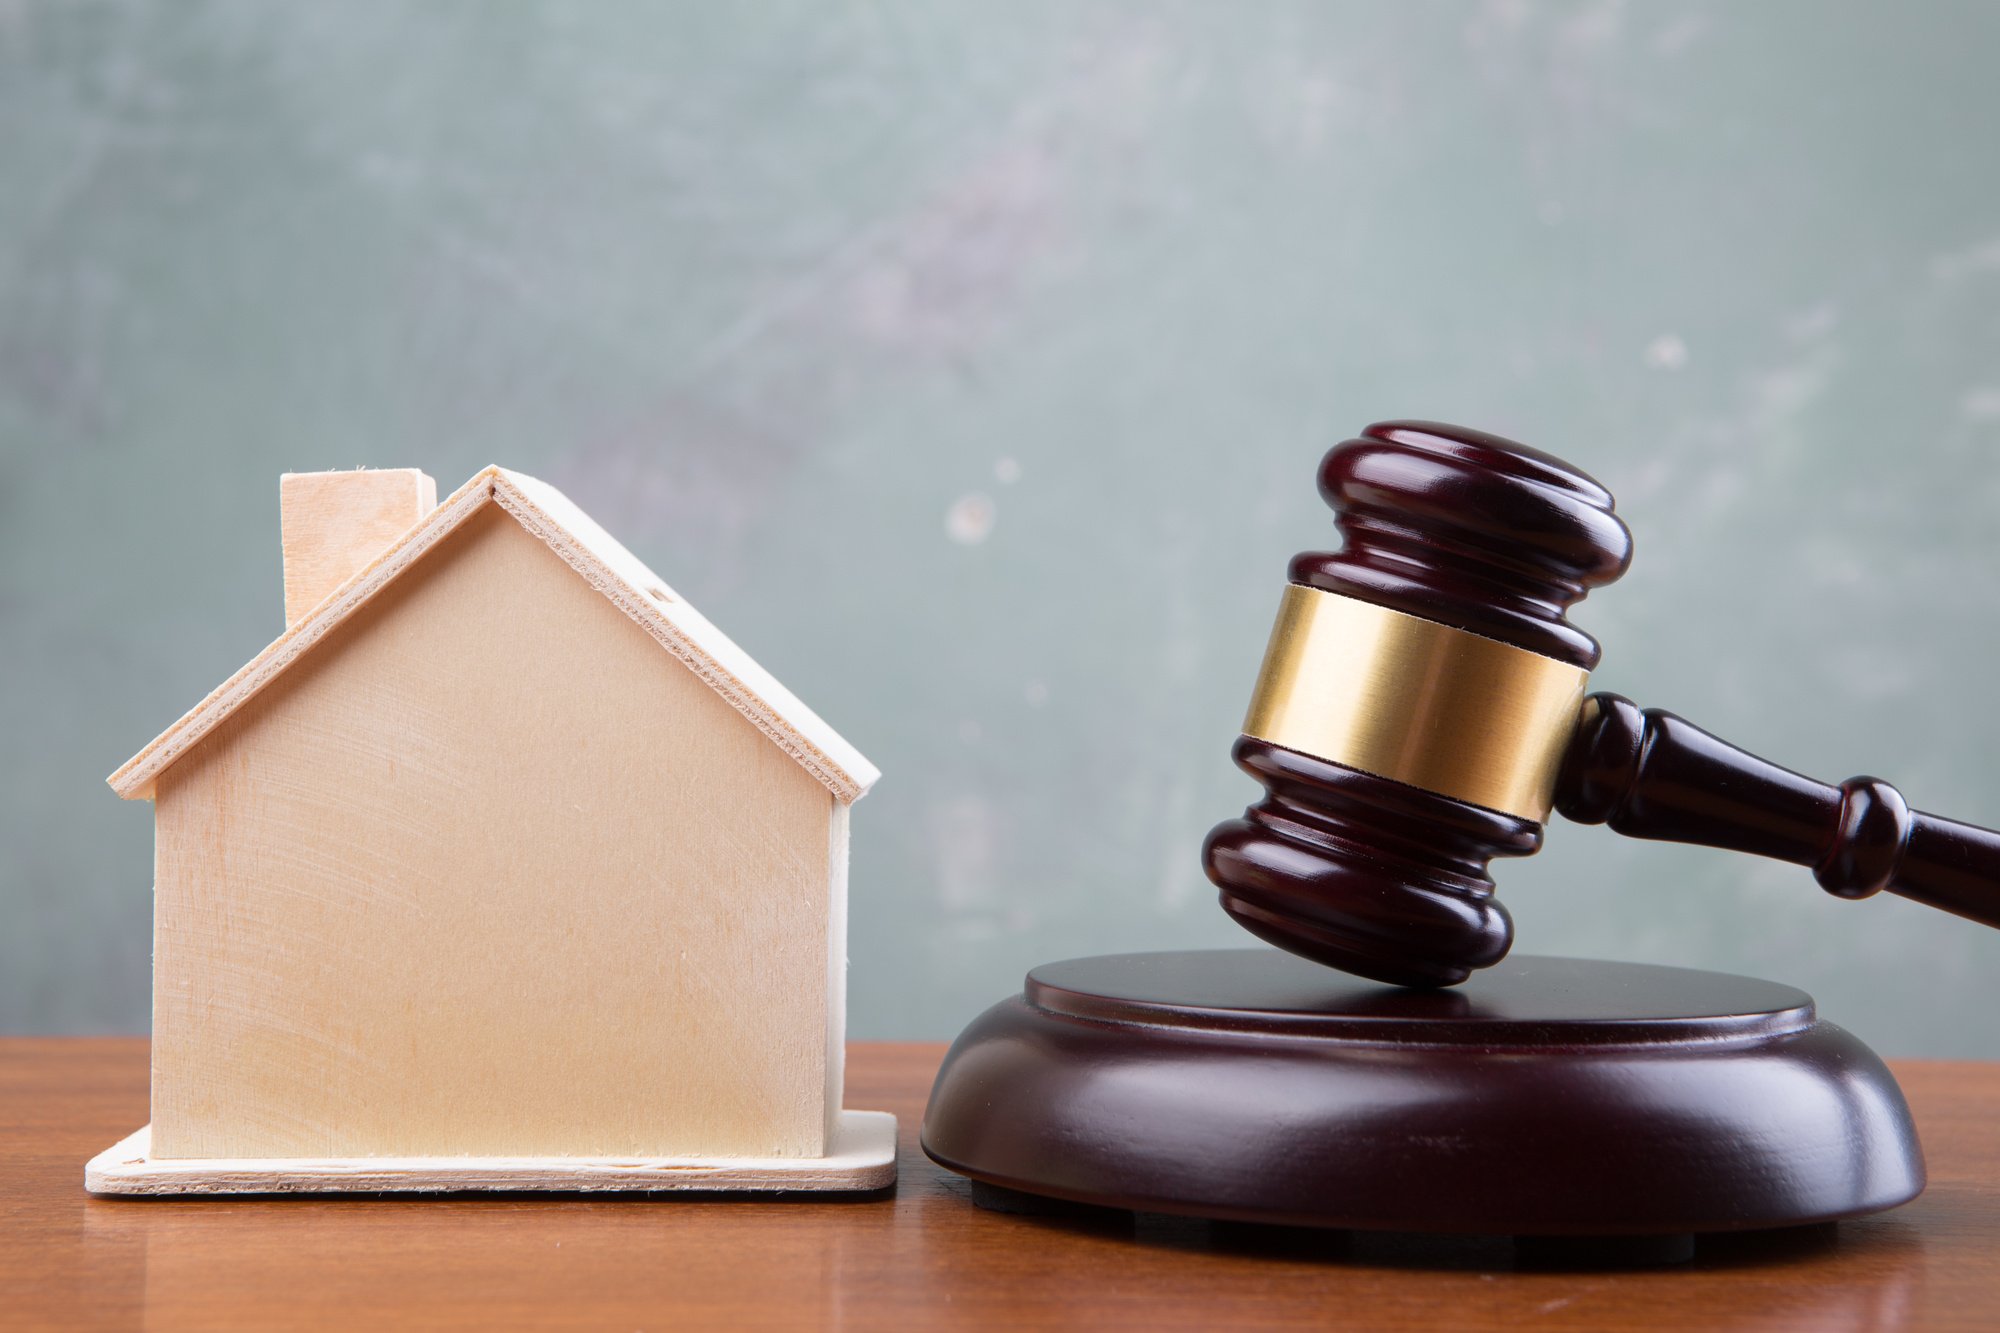 Real Estate Auctions: Buying and Selling Properties with Confidence